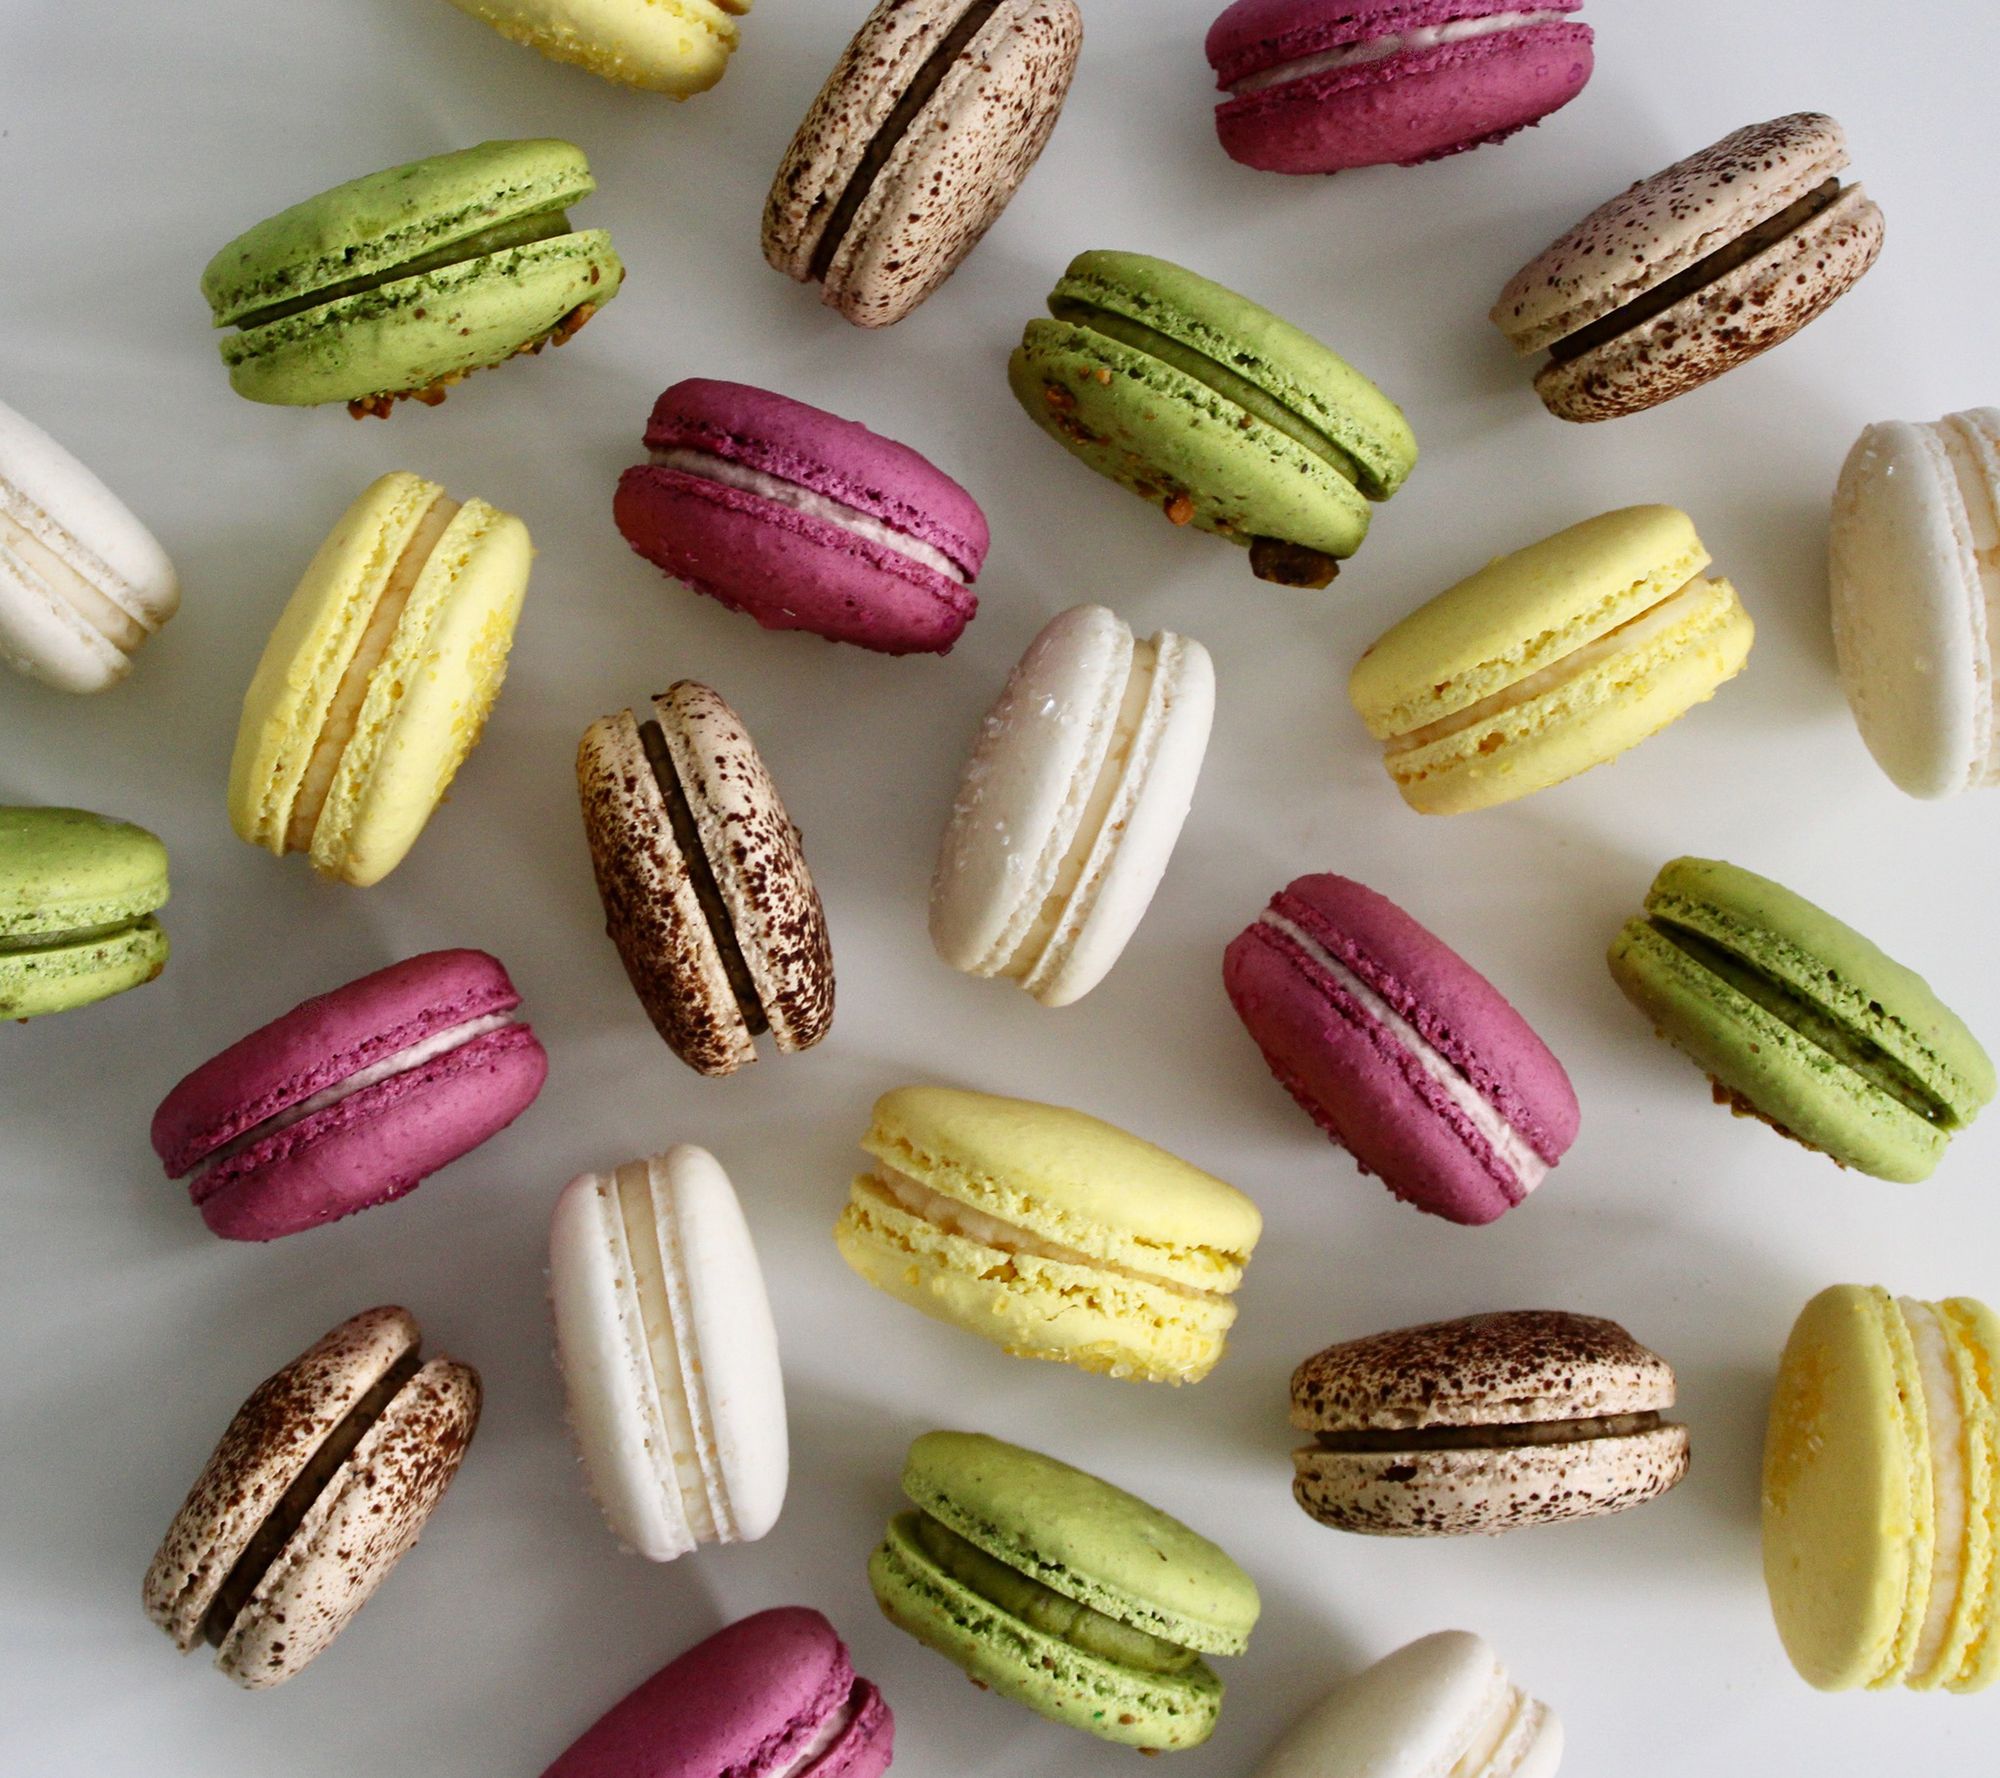 Macaron Supply List: Everything You Need to Make Your Own Macarons